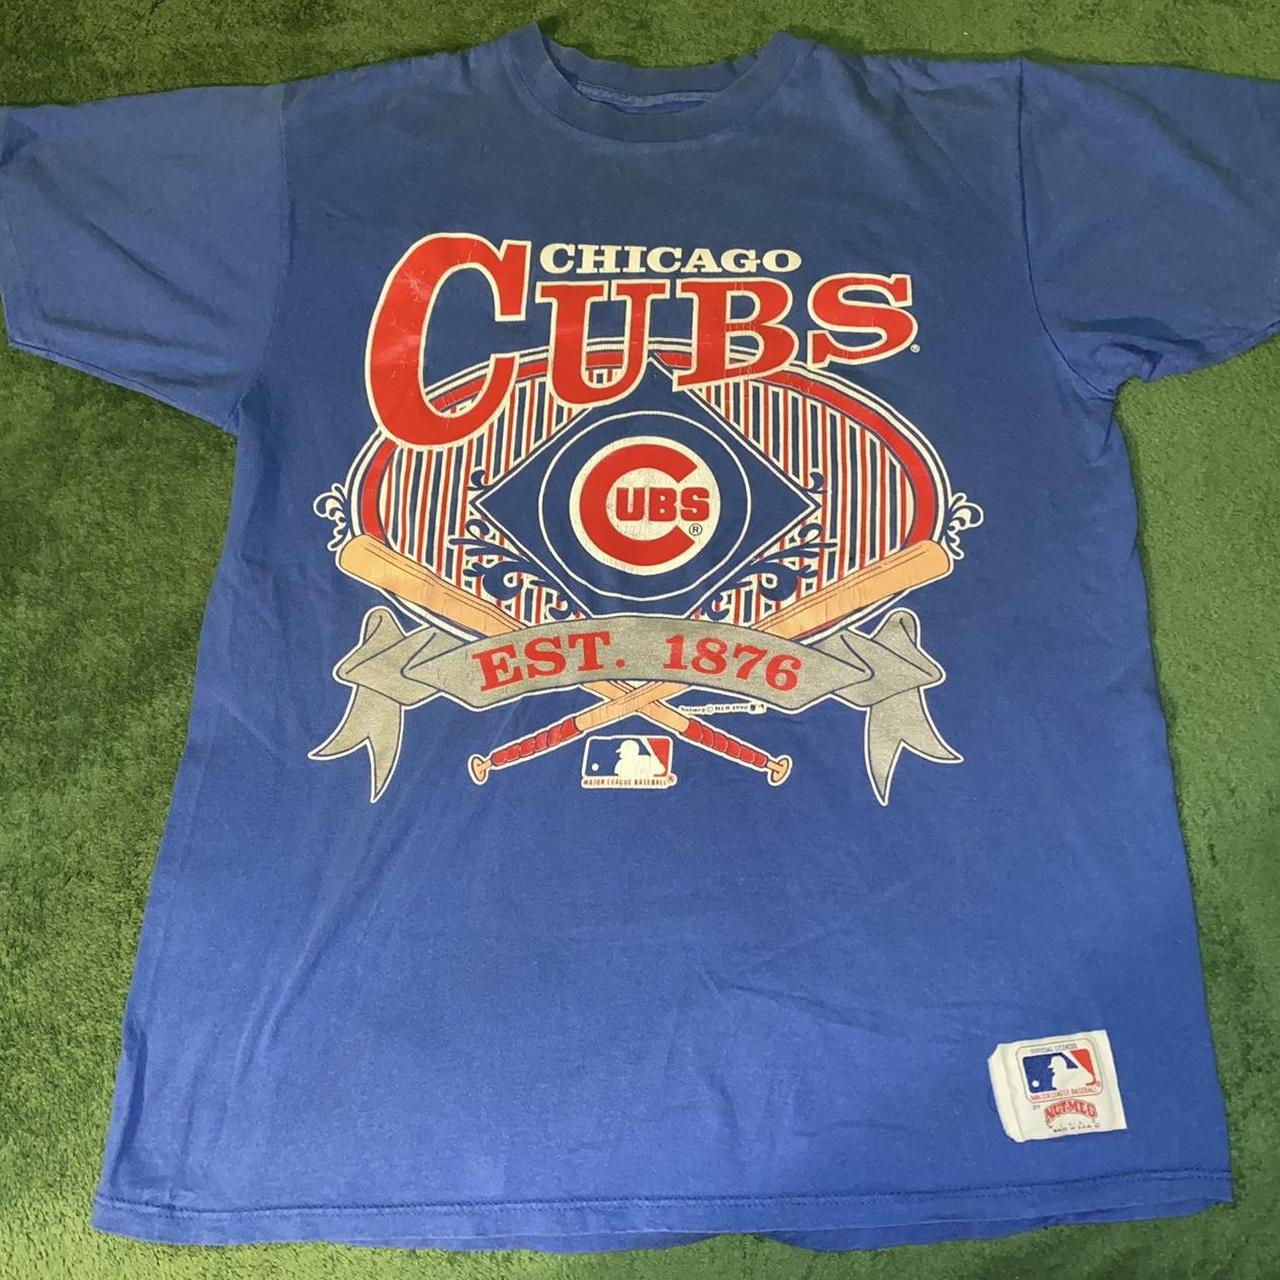 Vintage 1990s Chicago Cubs Tee T Shirt Genuine MLB Large USA Made